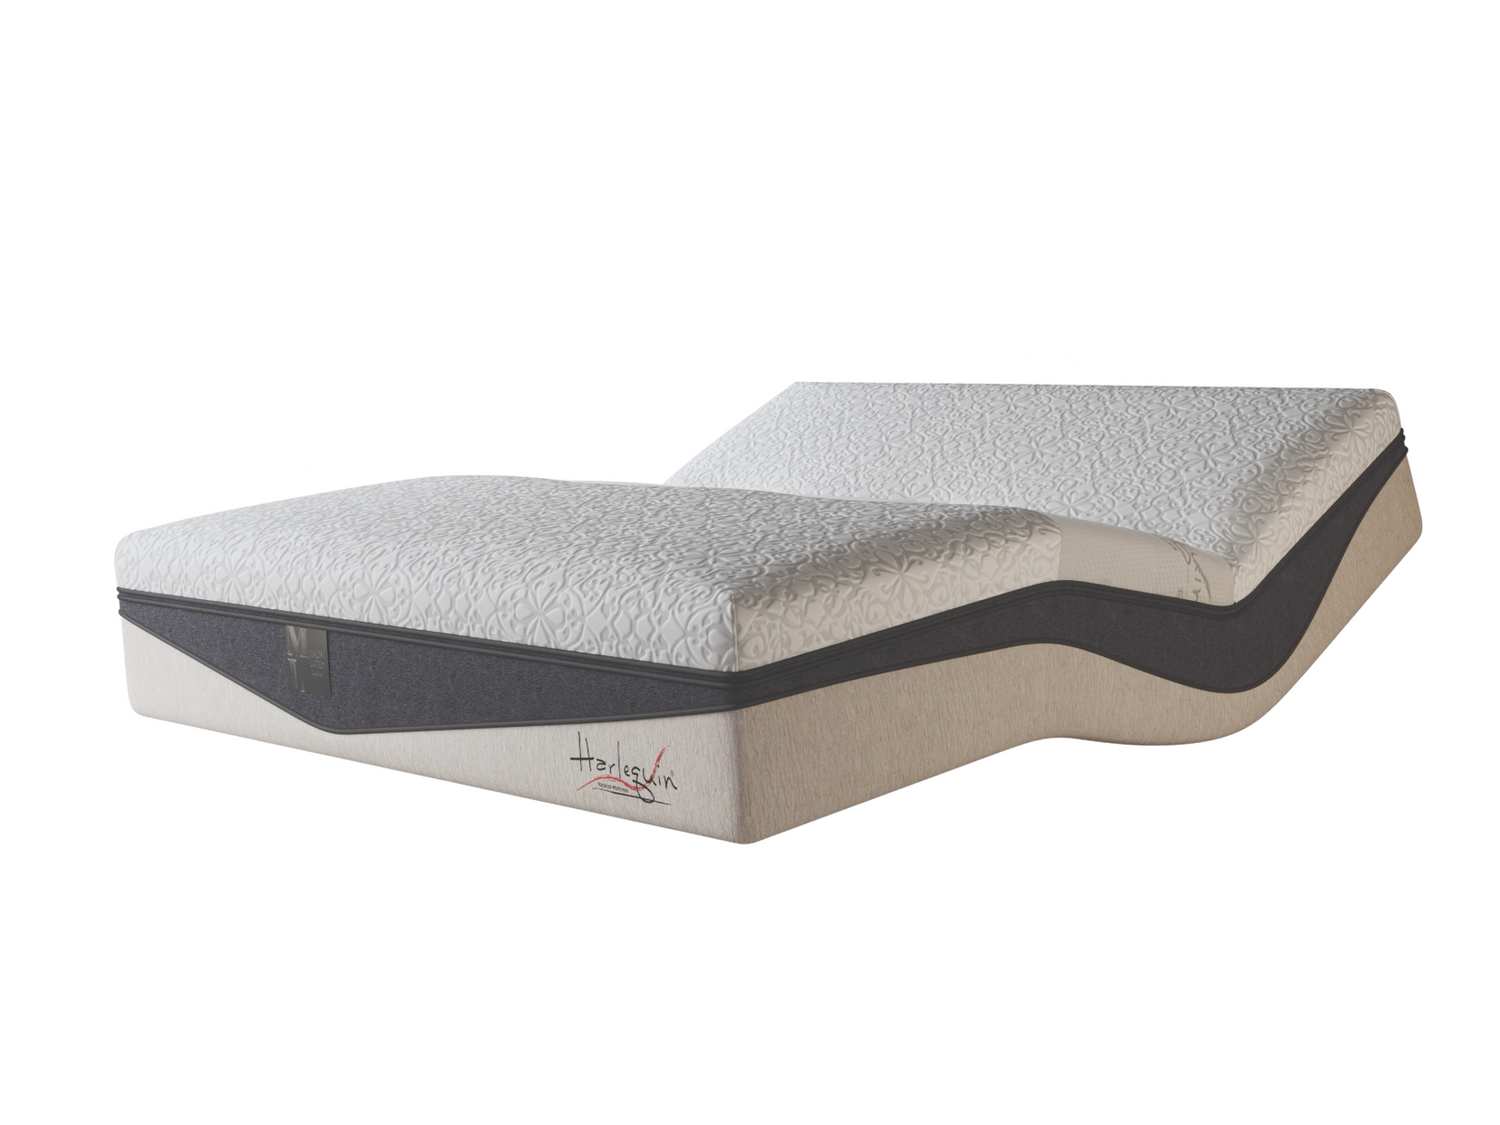 The Only Mattress That Does Not Require an Adjustable Base for Optimal Support